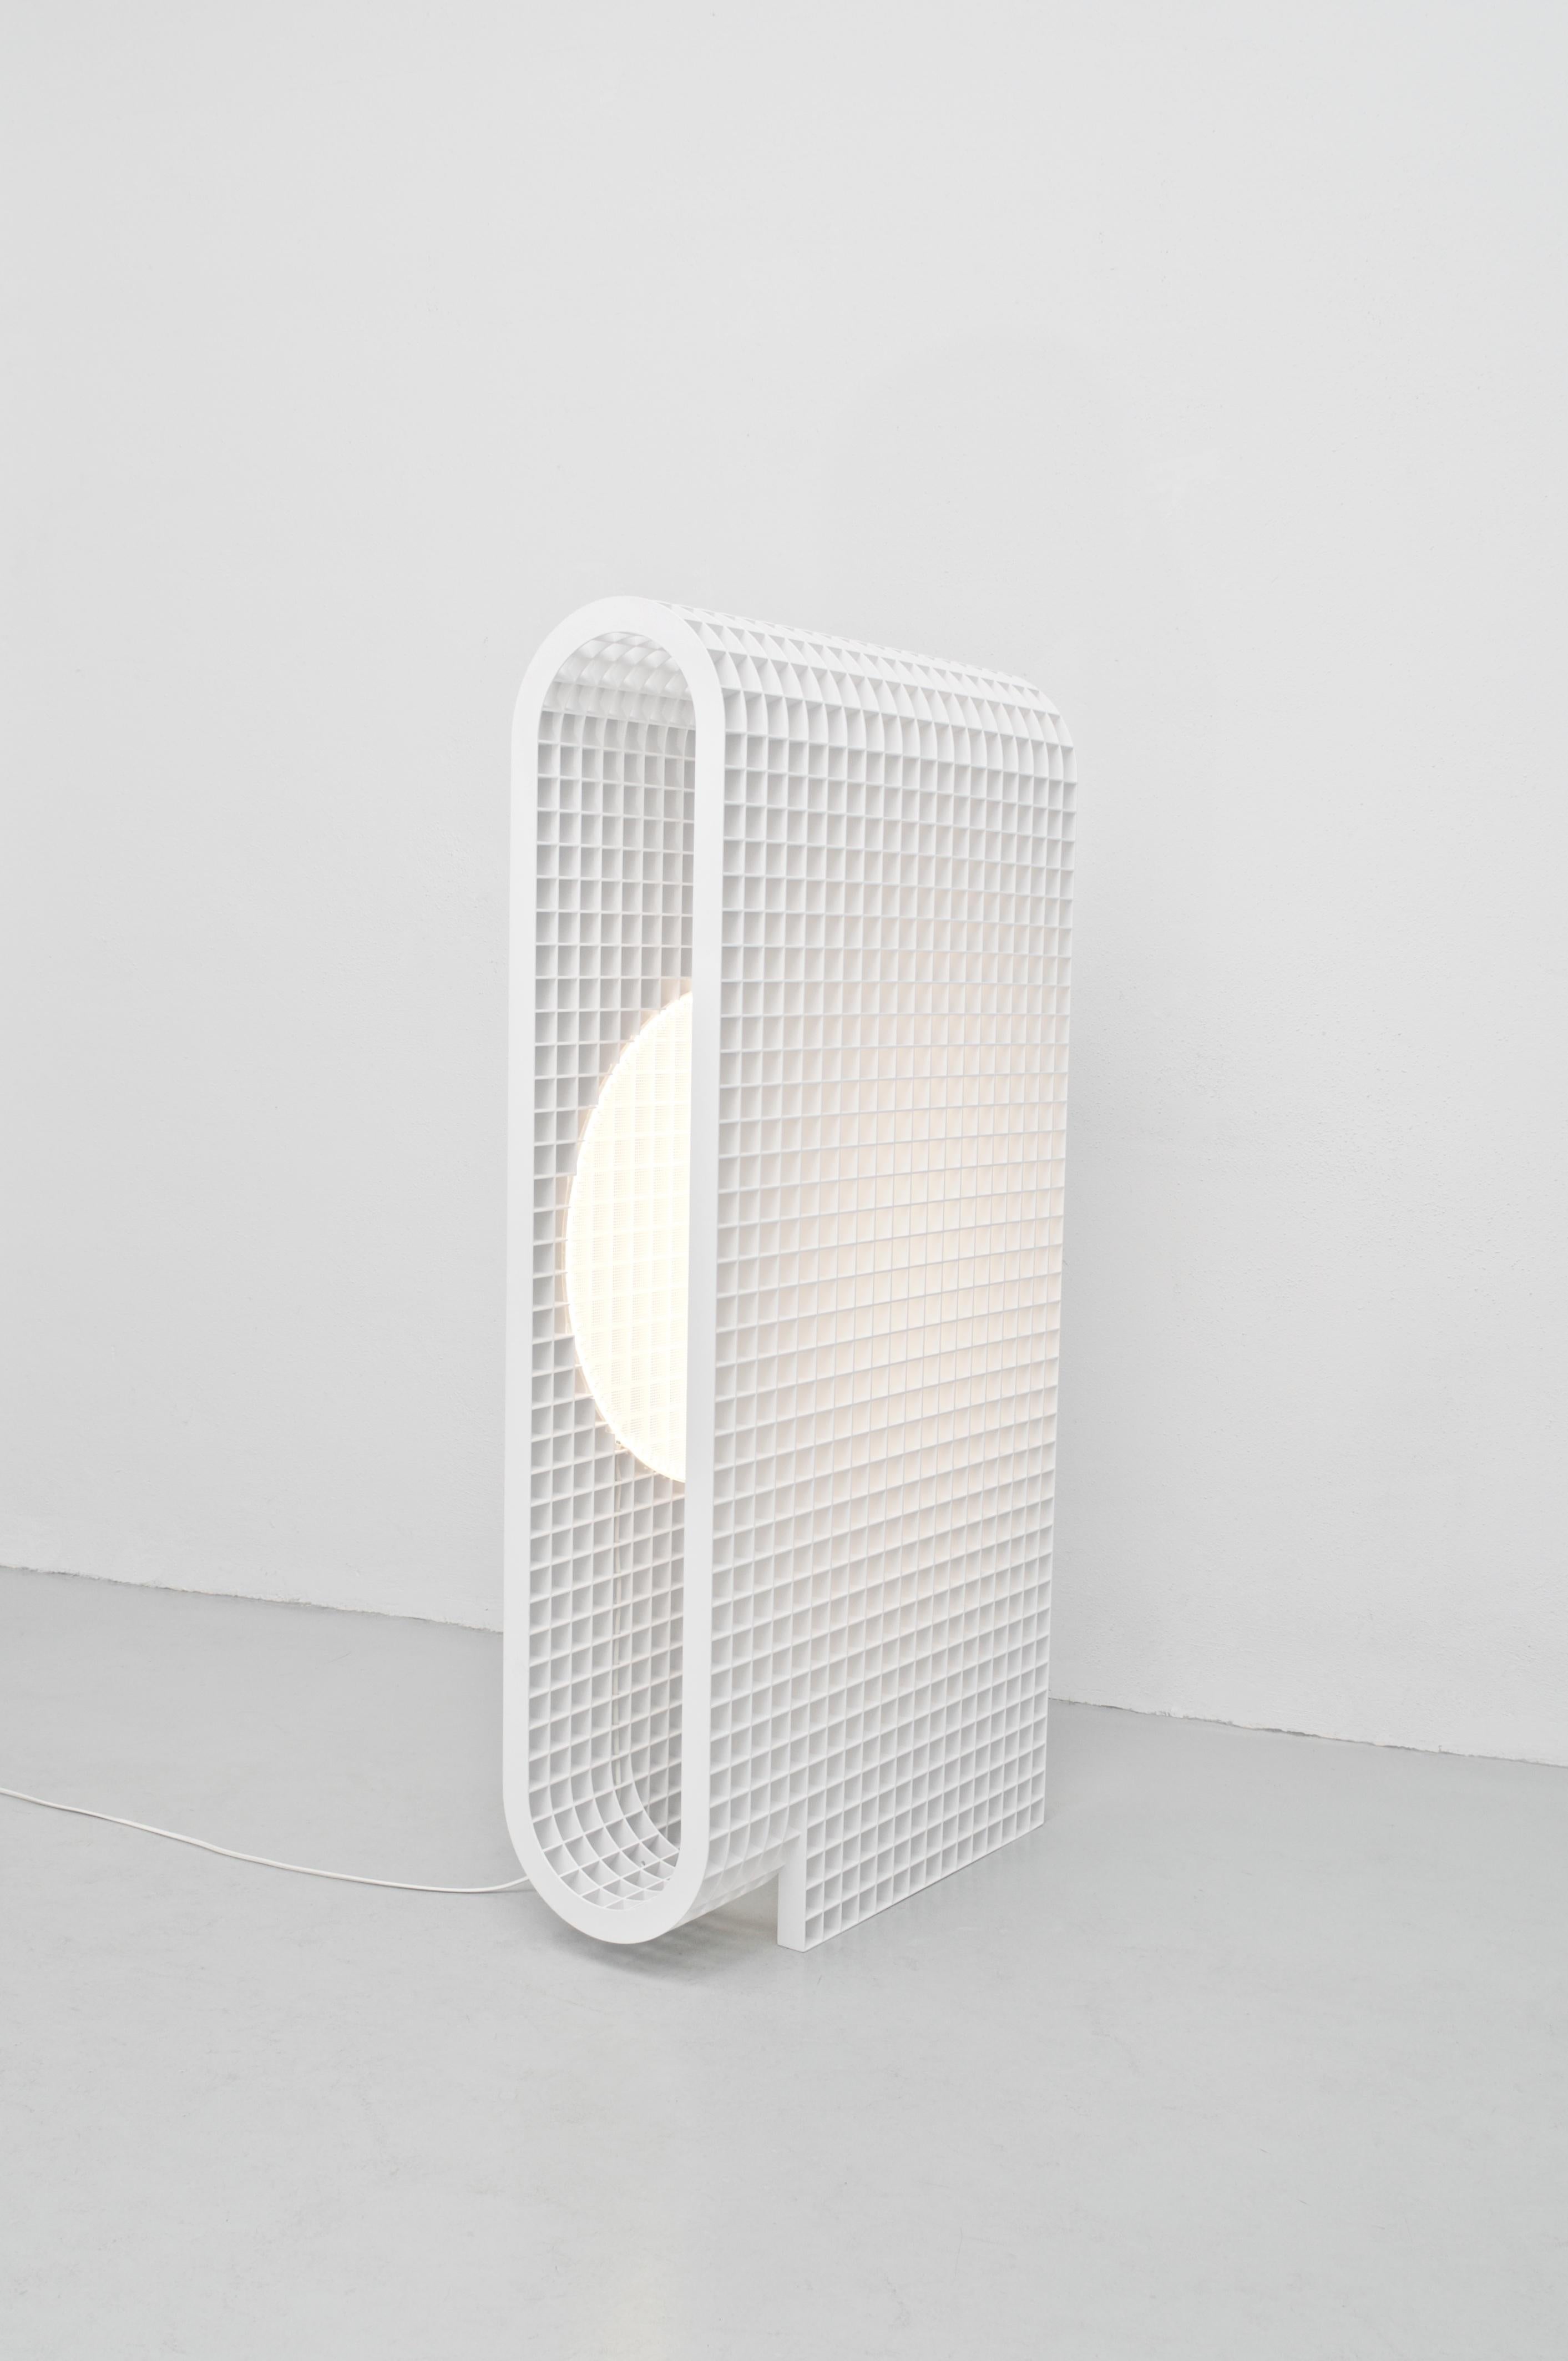 Dutch Matrix Lamp by OS And OOS